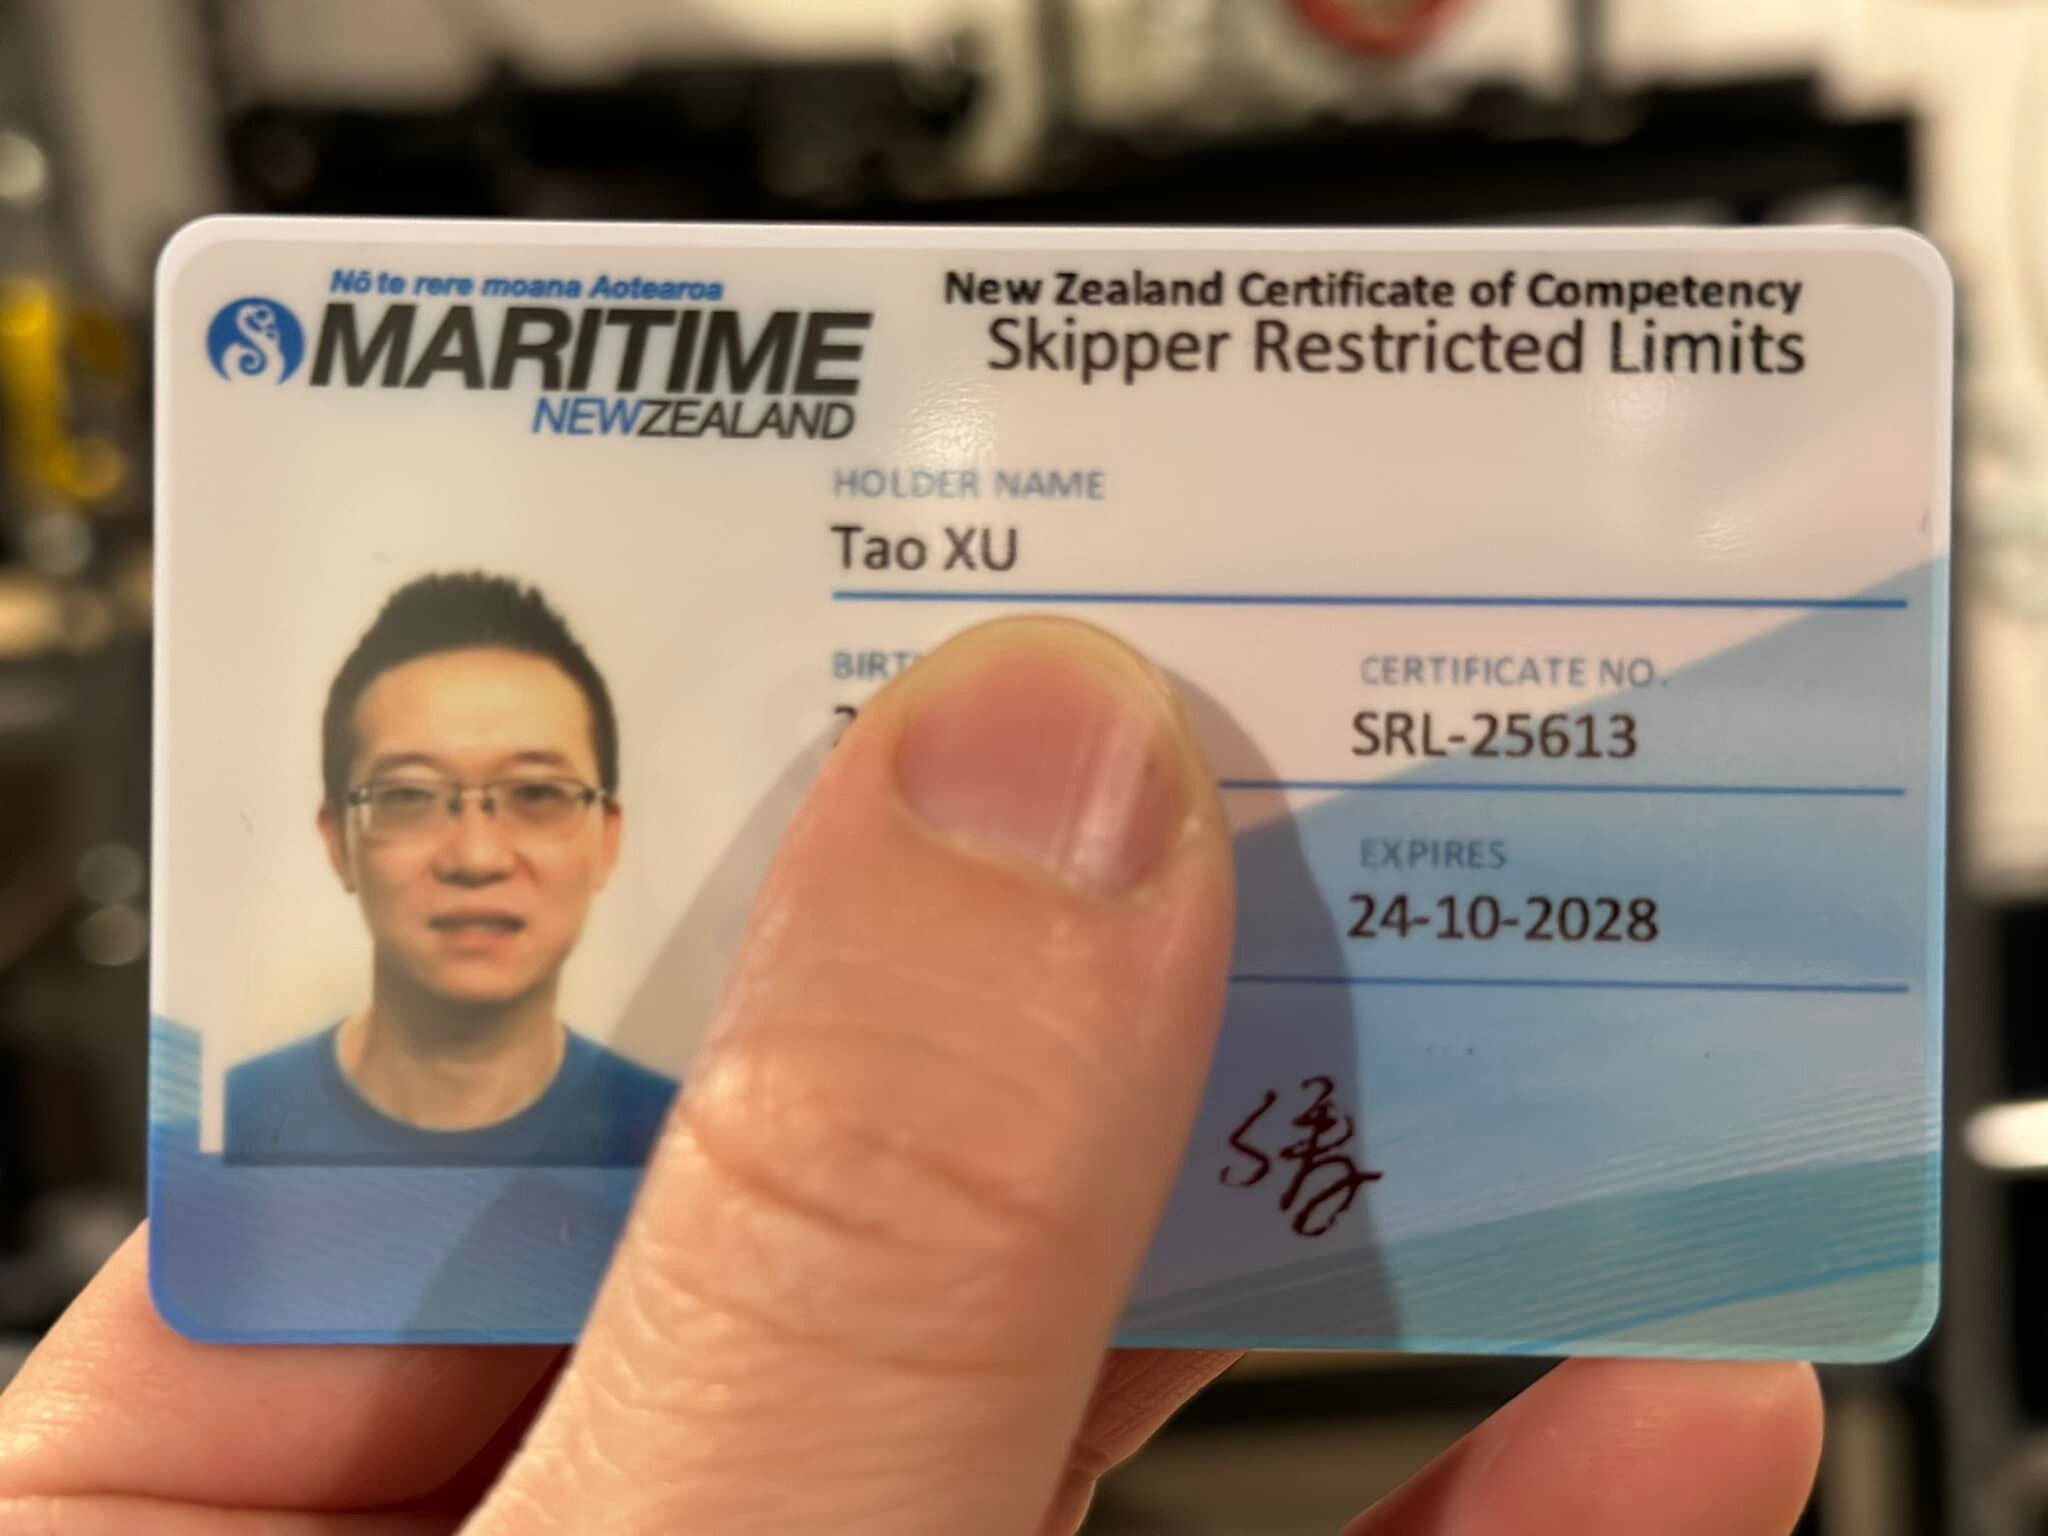 After one year of hard work, I&rsquo;m really happy that I got  my Commercial Skipper License now 😀.

I don&rsquo;t really have much time to myself nowadays with a young family. Had to get up really early most days to study. Hey, I got there!